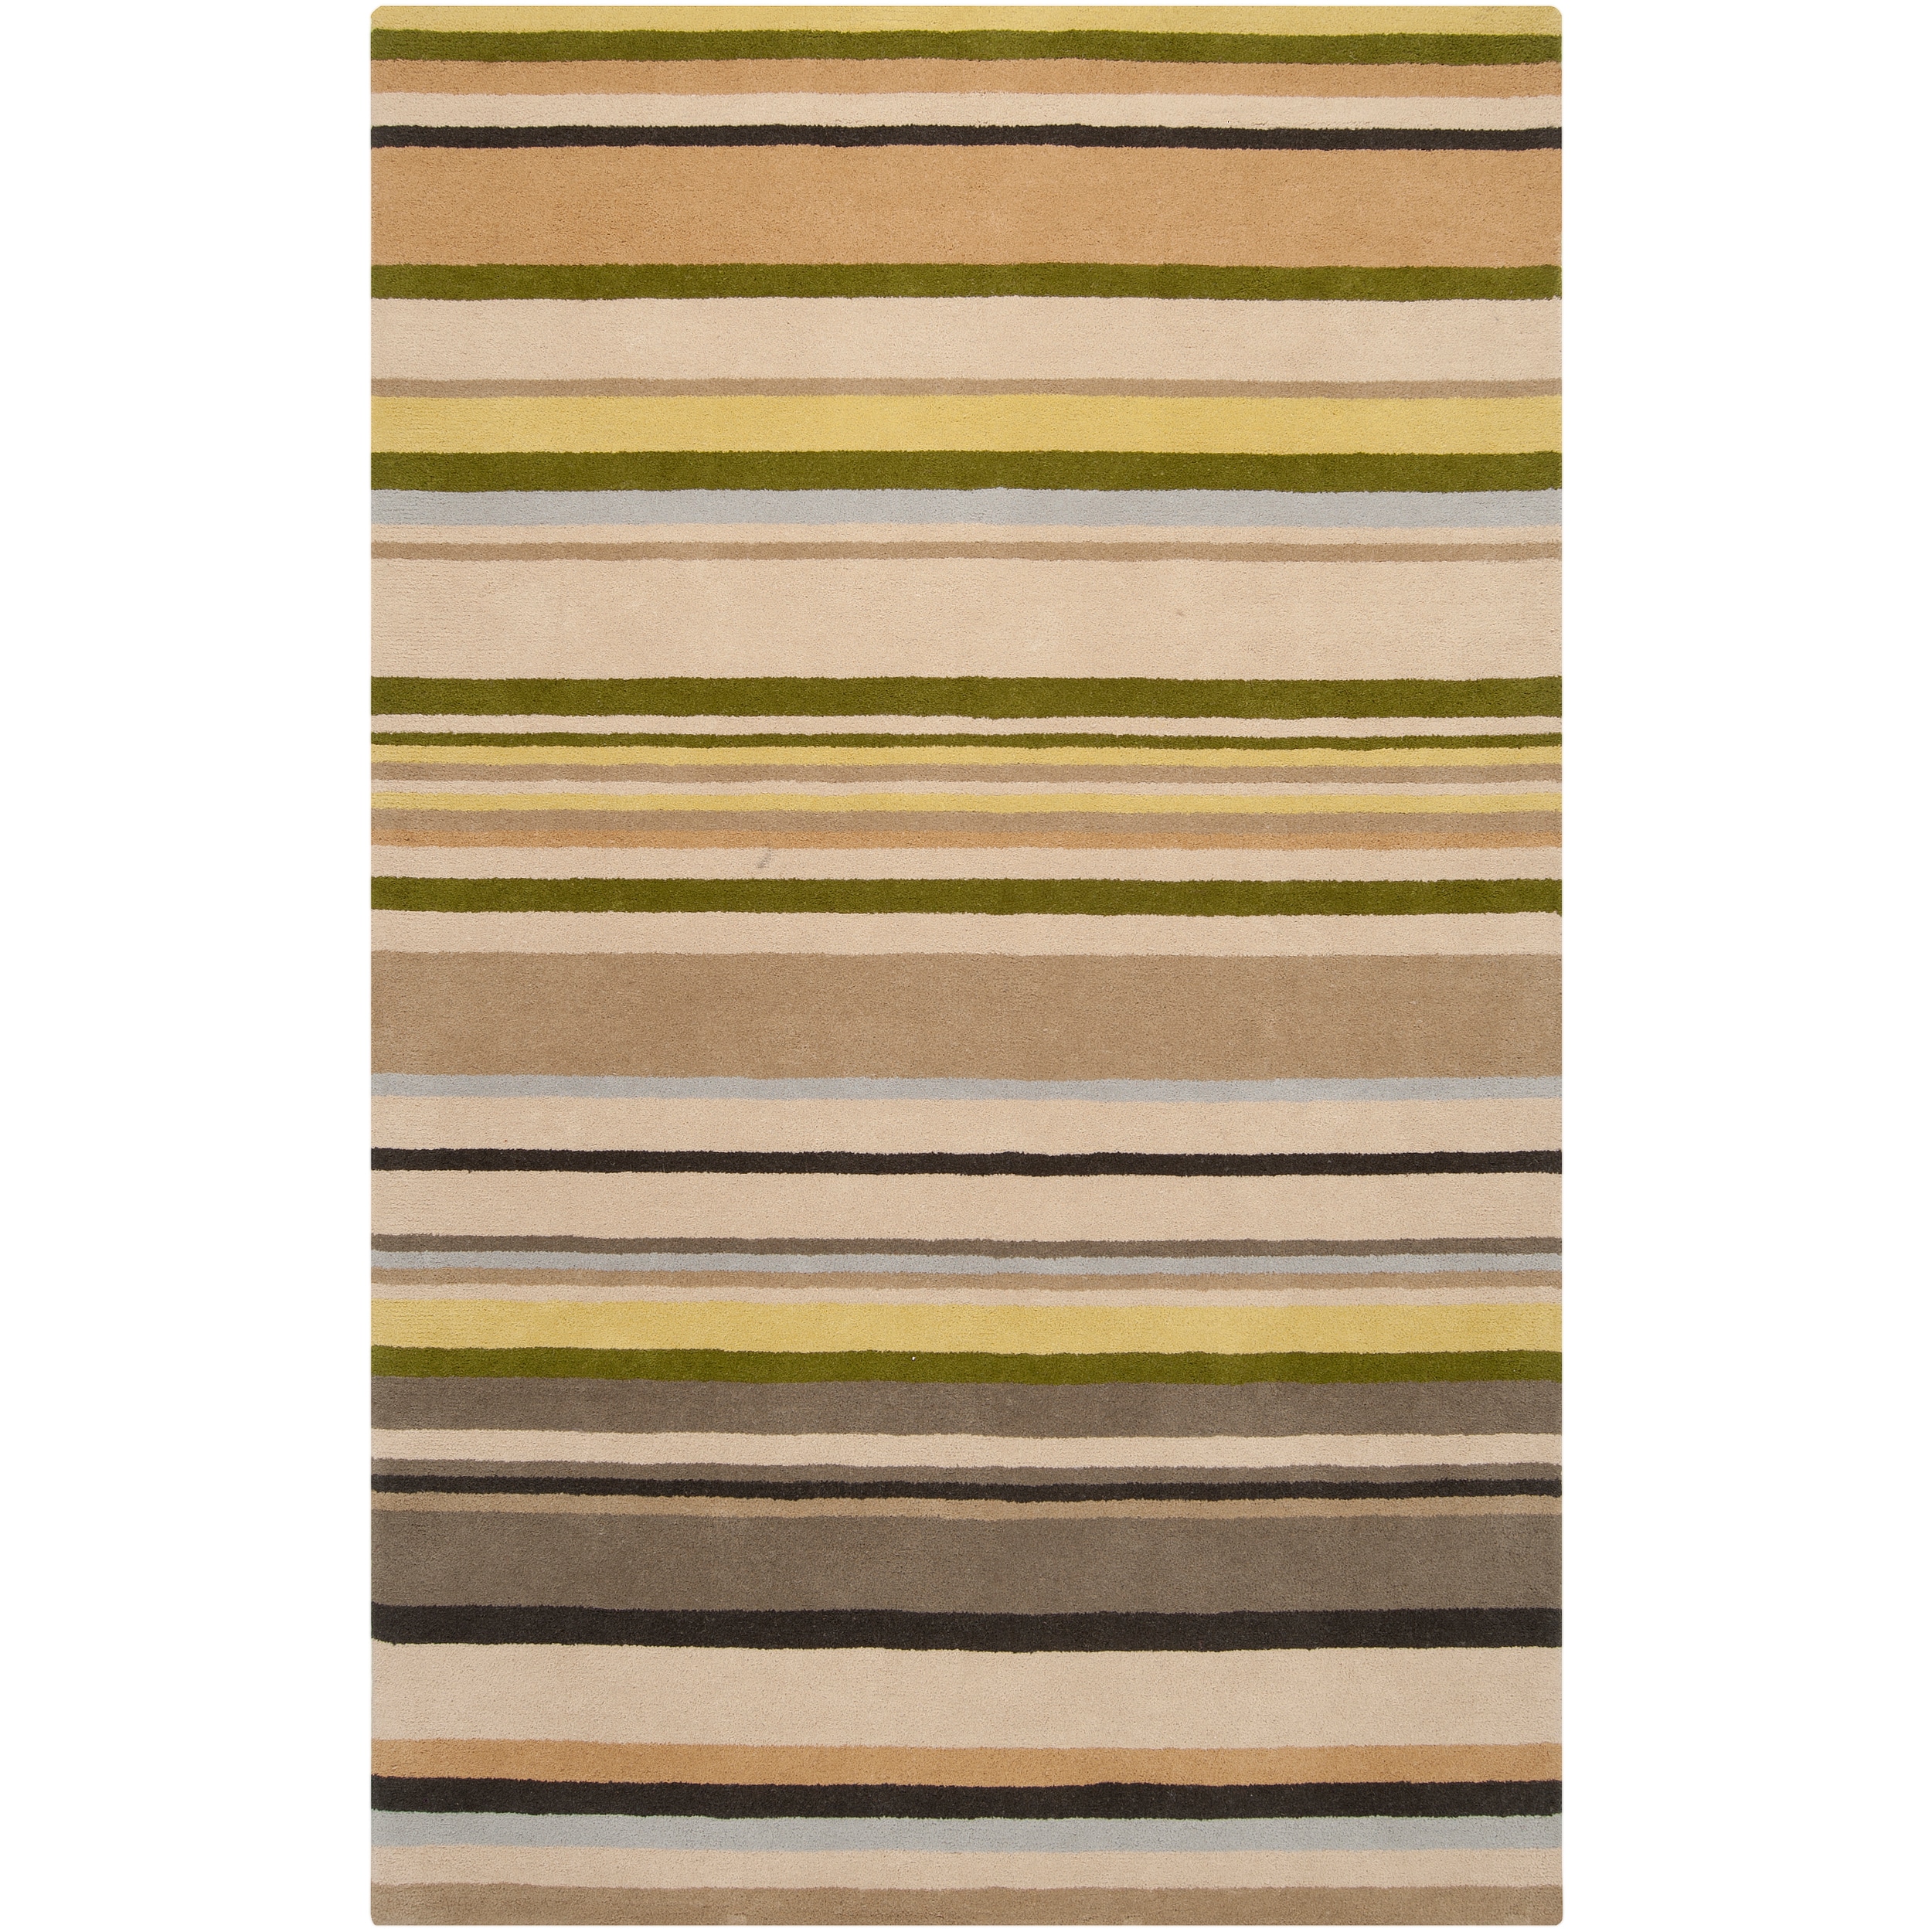 Harlequin Hand tufted Beige Opaque Striped Wool Rug (5 X 8)